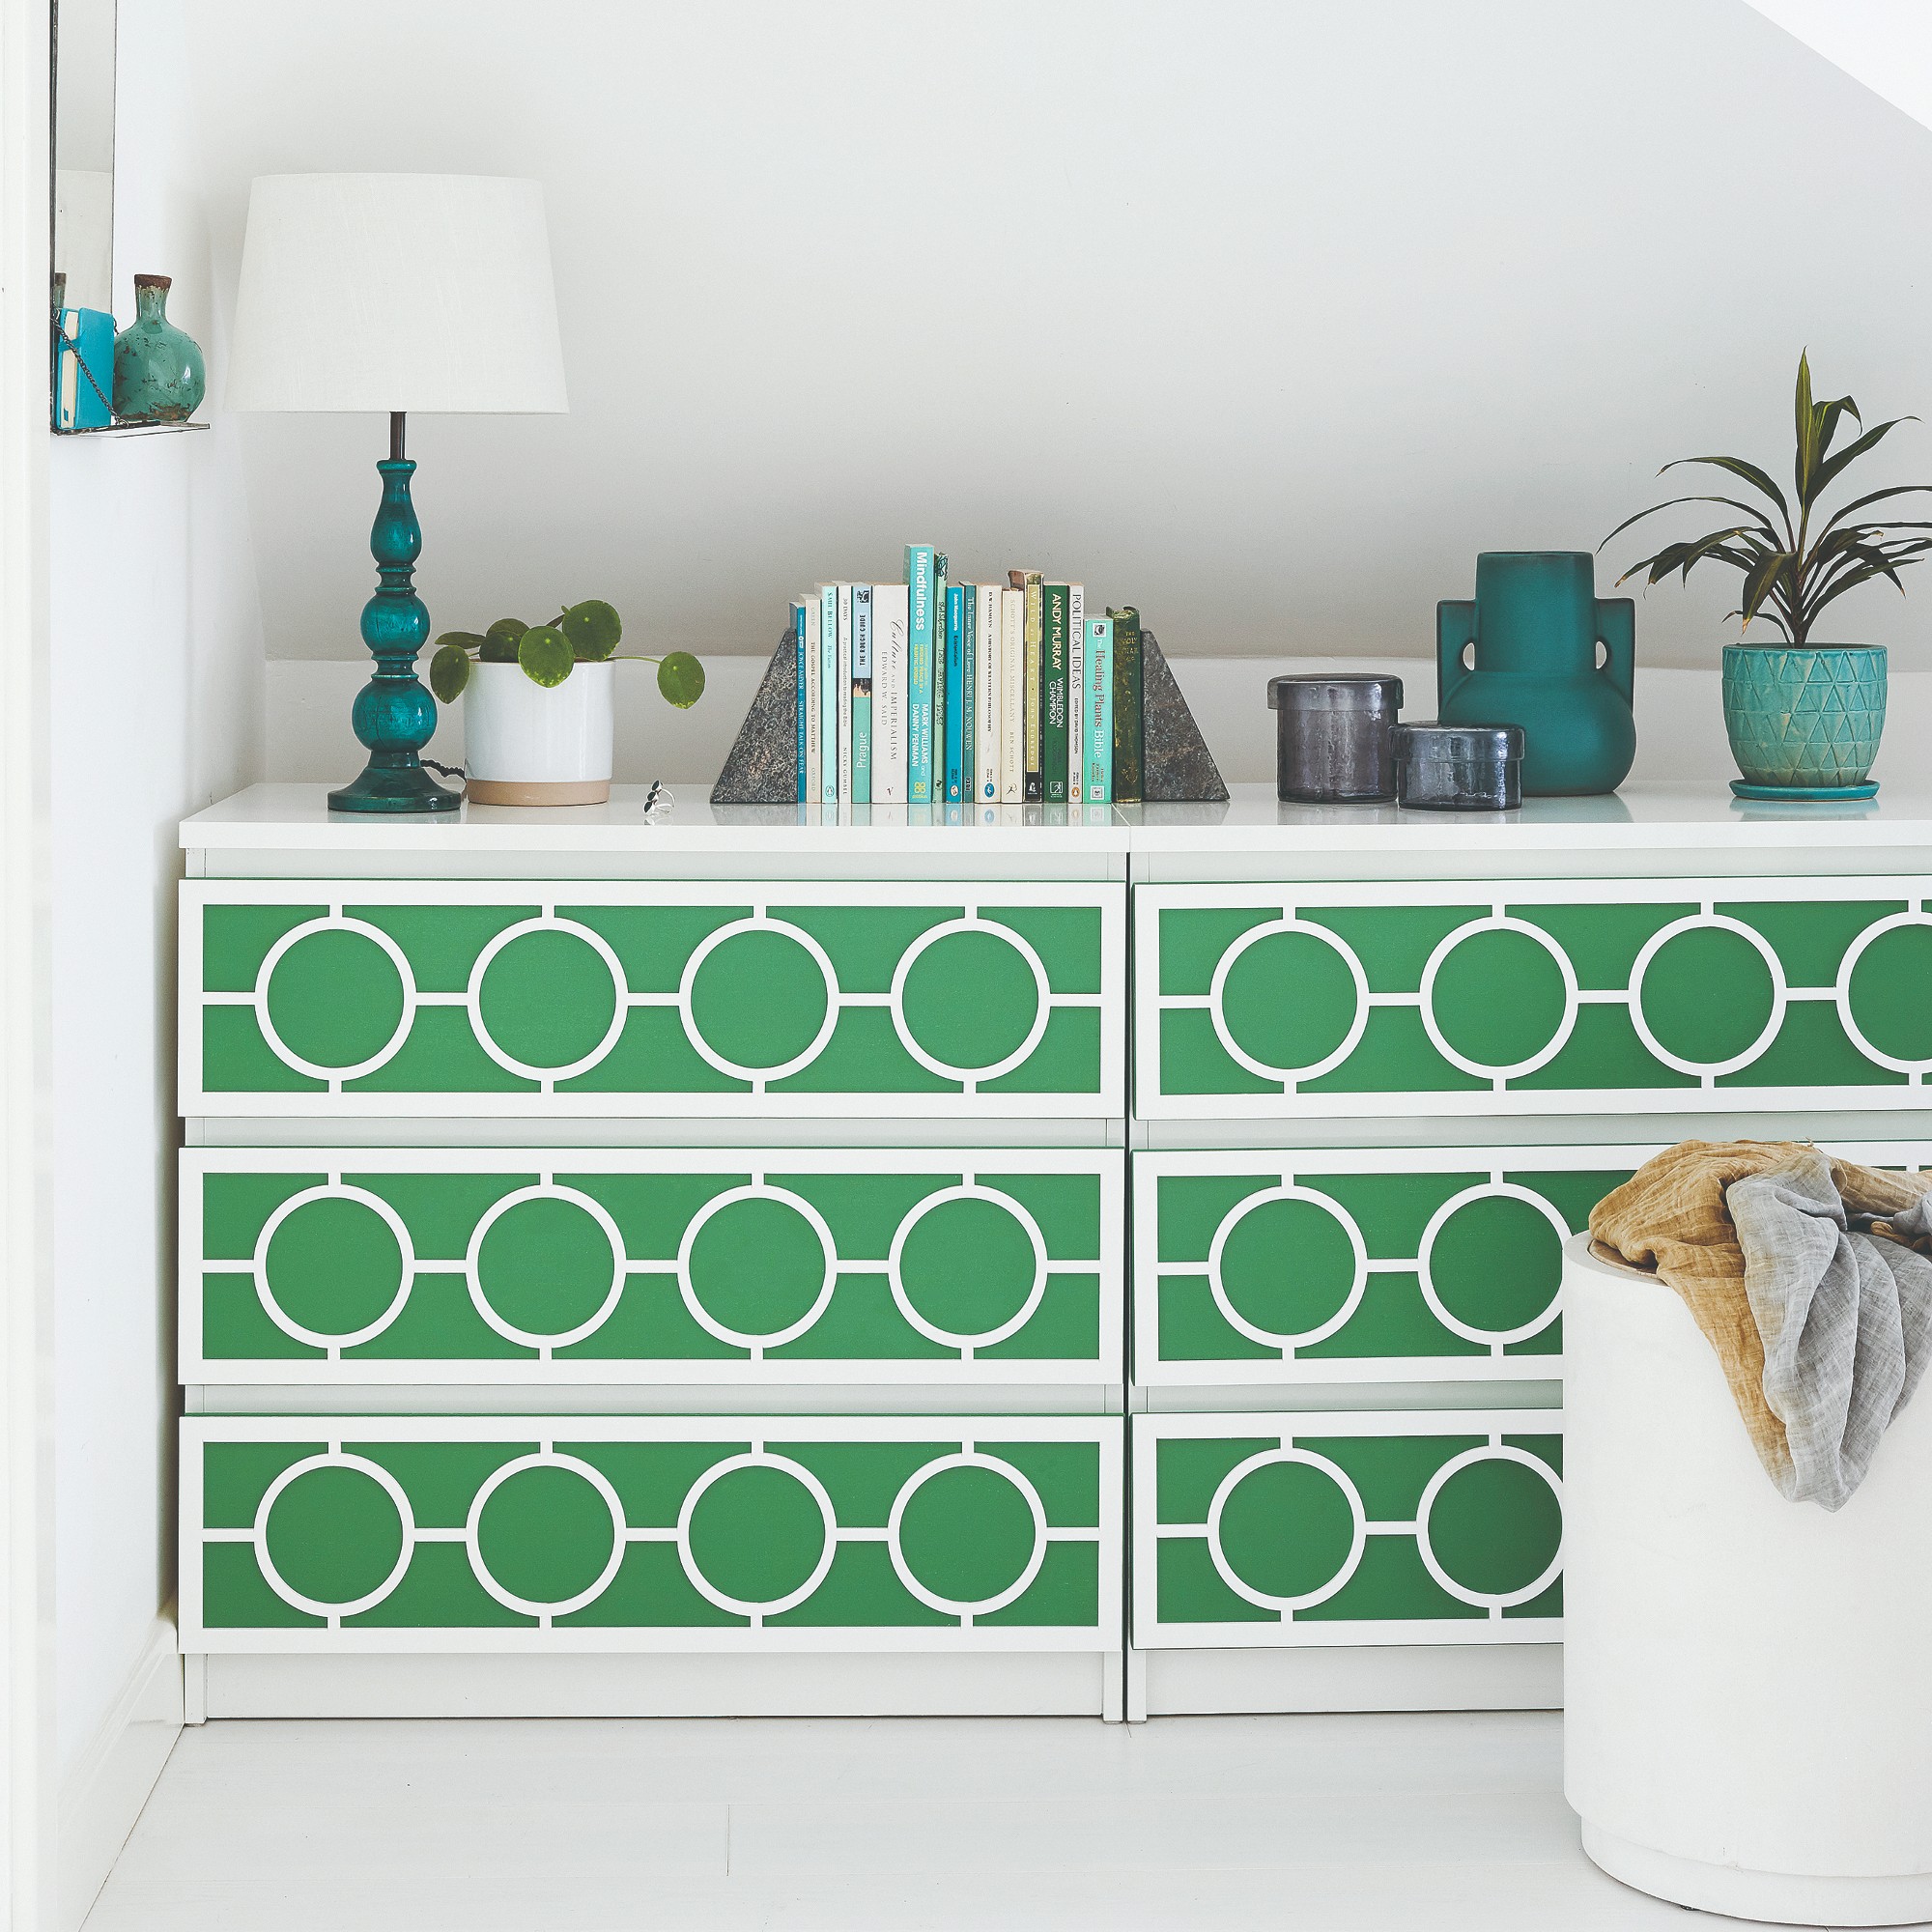 A patterned green chest of drawers in a white-painted room